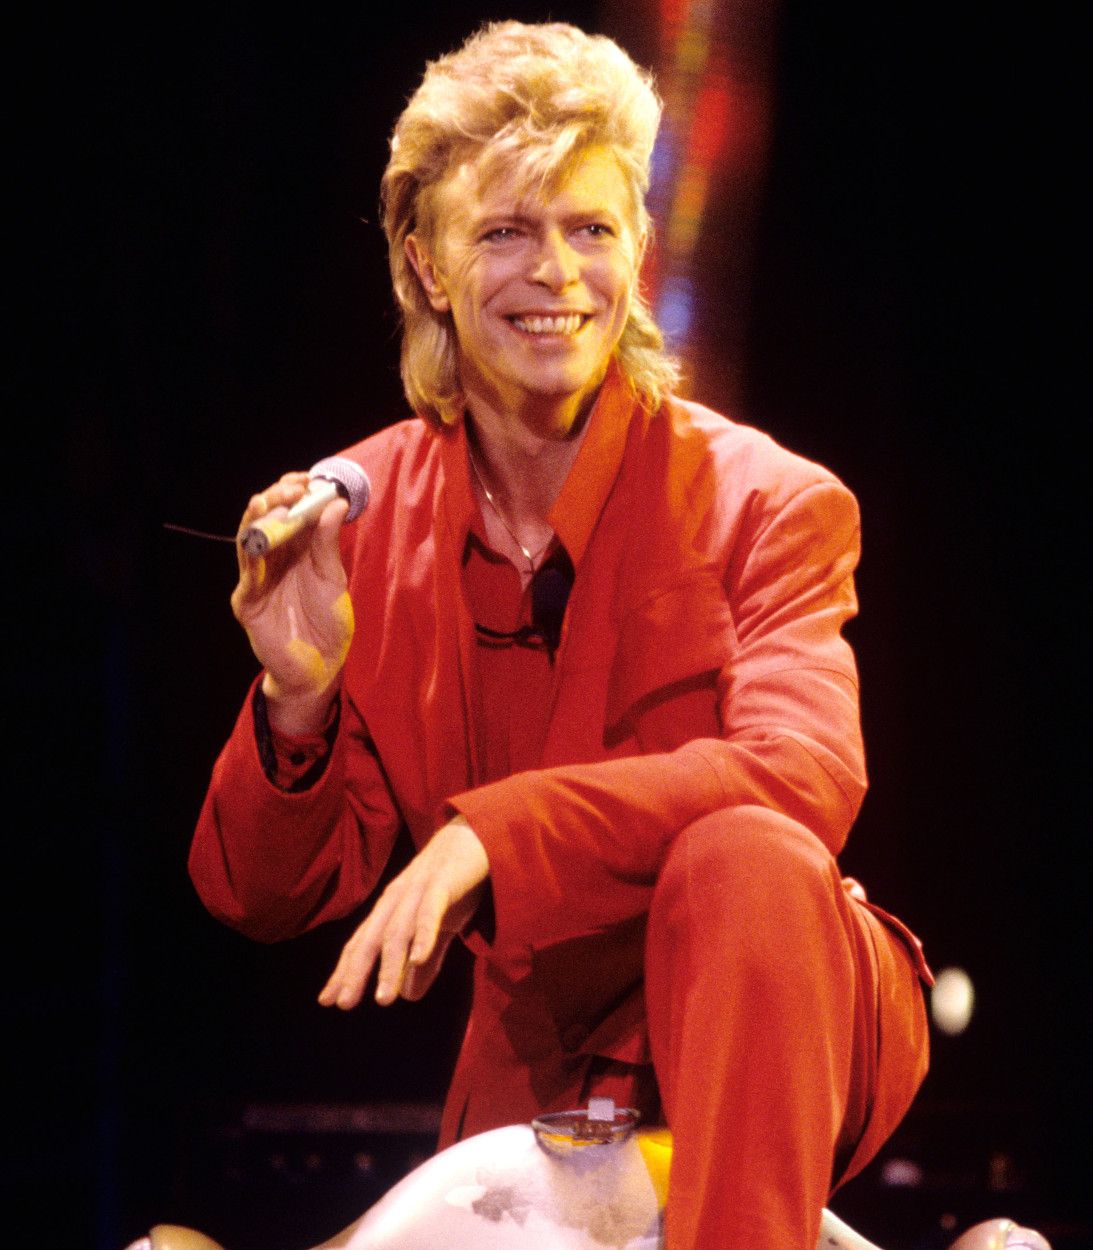 David Bowie performing live in concert